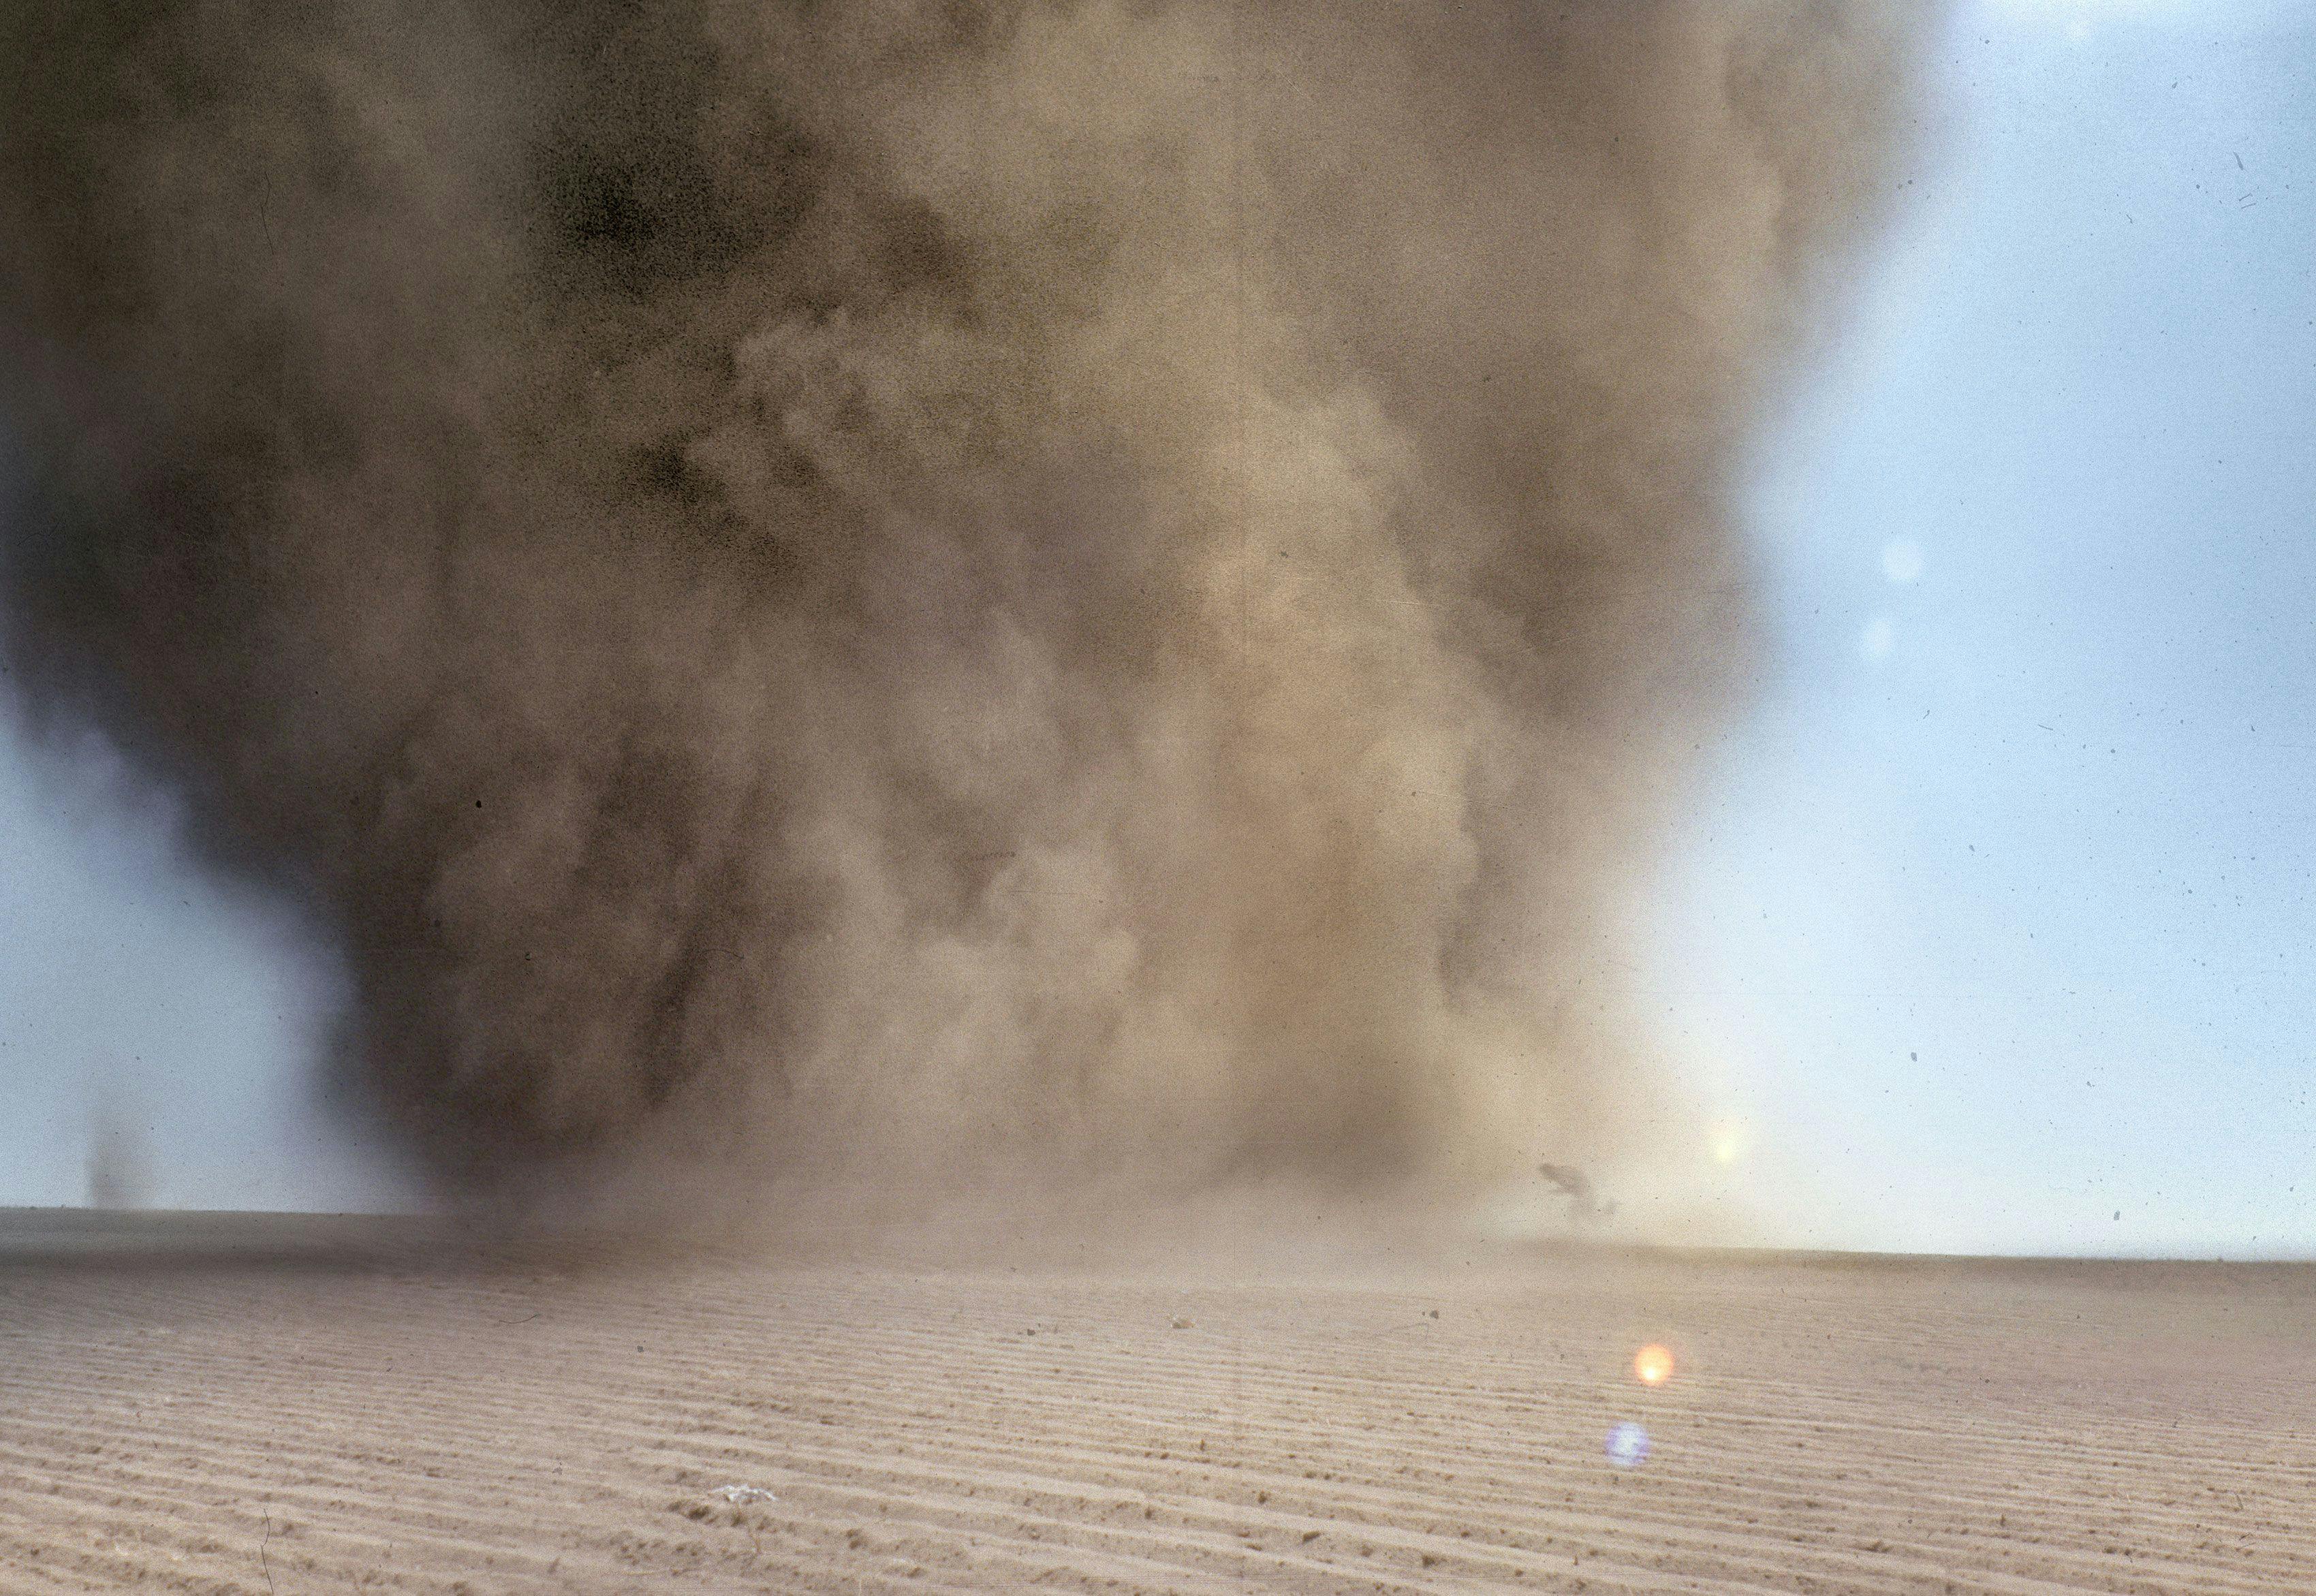 A work by Francis A√øls in collaboration with Julien Devaux, titled Tornado, dated 2000 to 2010.